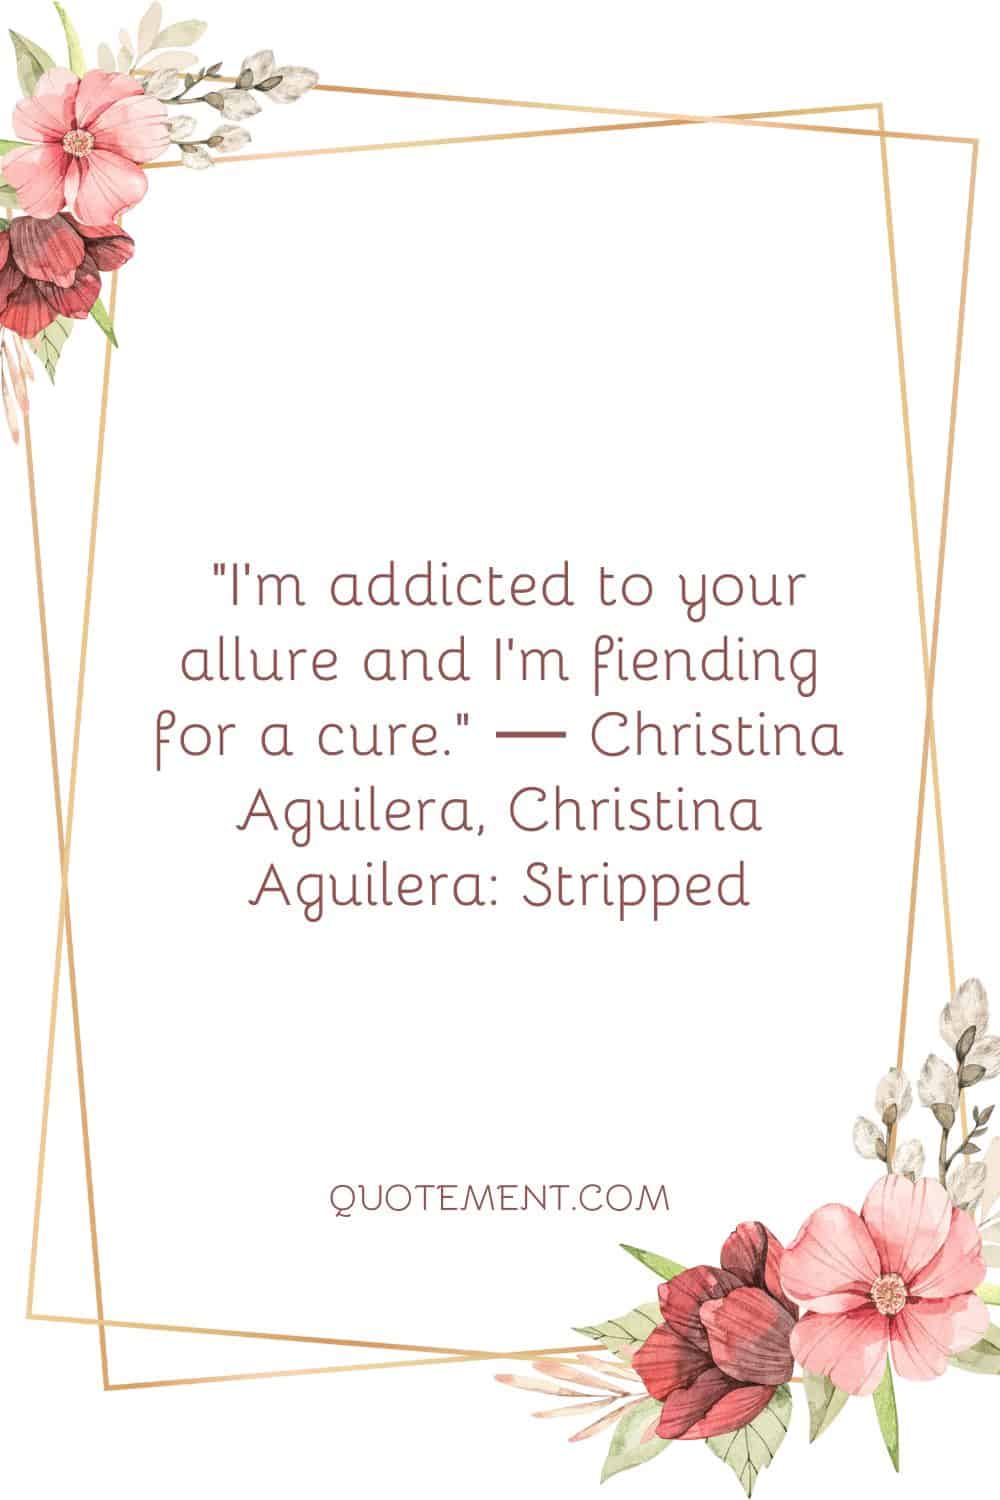 I’m addicted to your allure and I’m fiending for a cure.